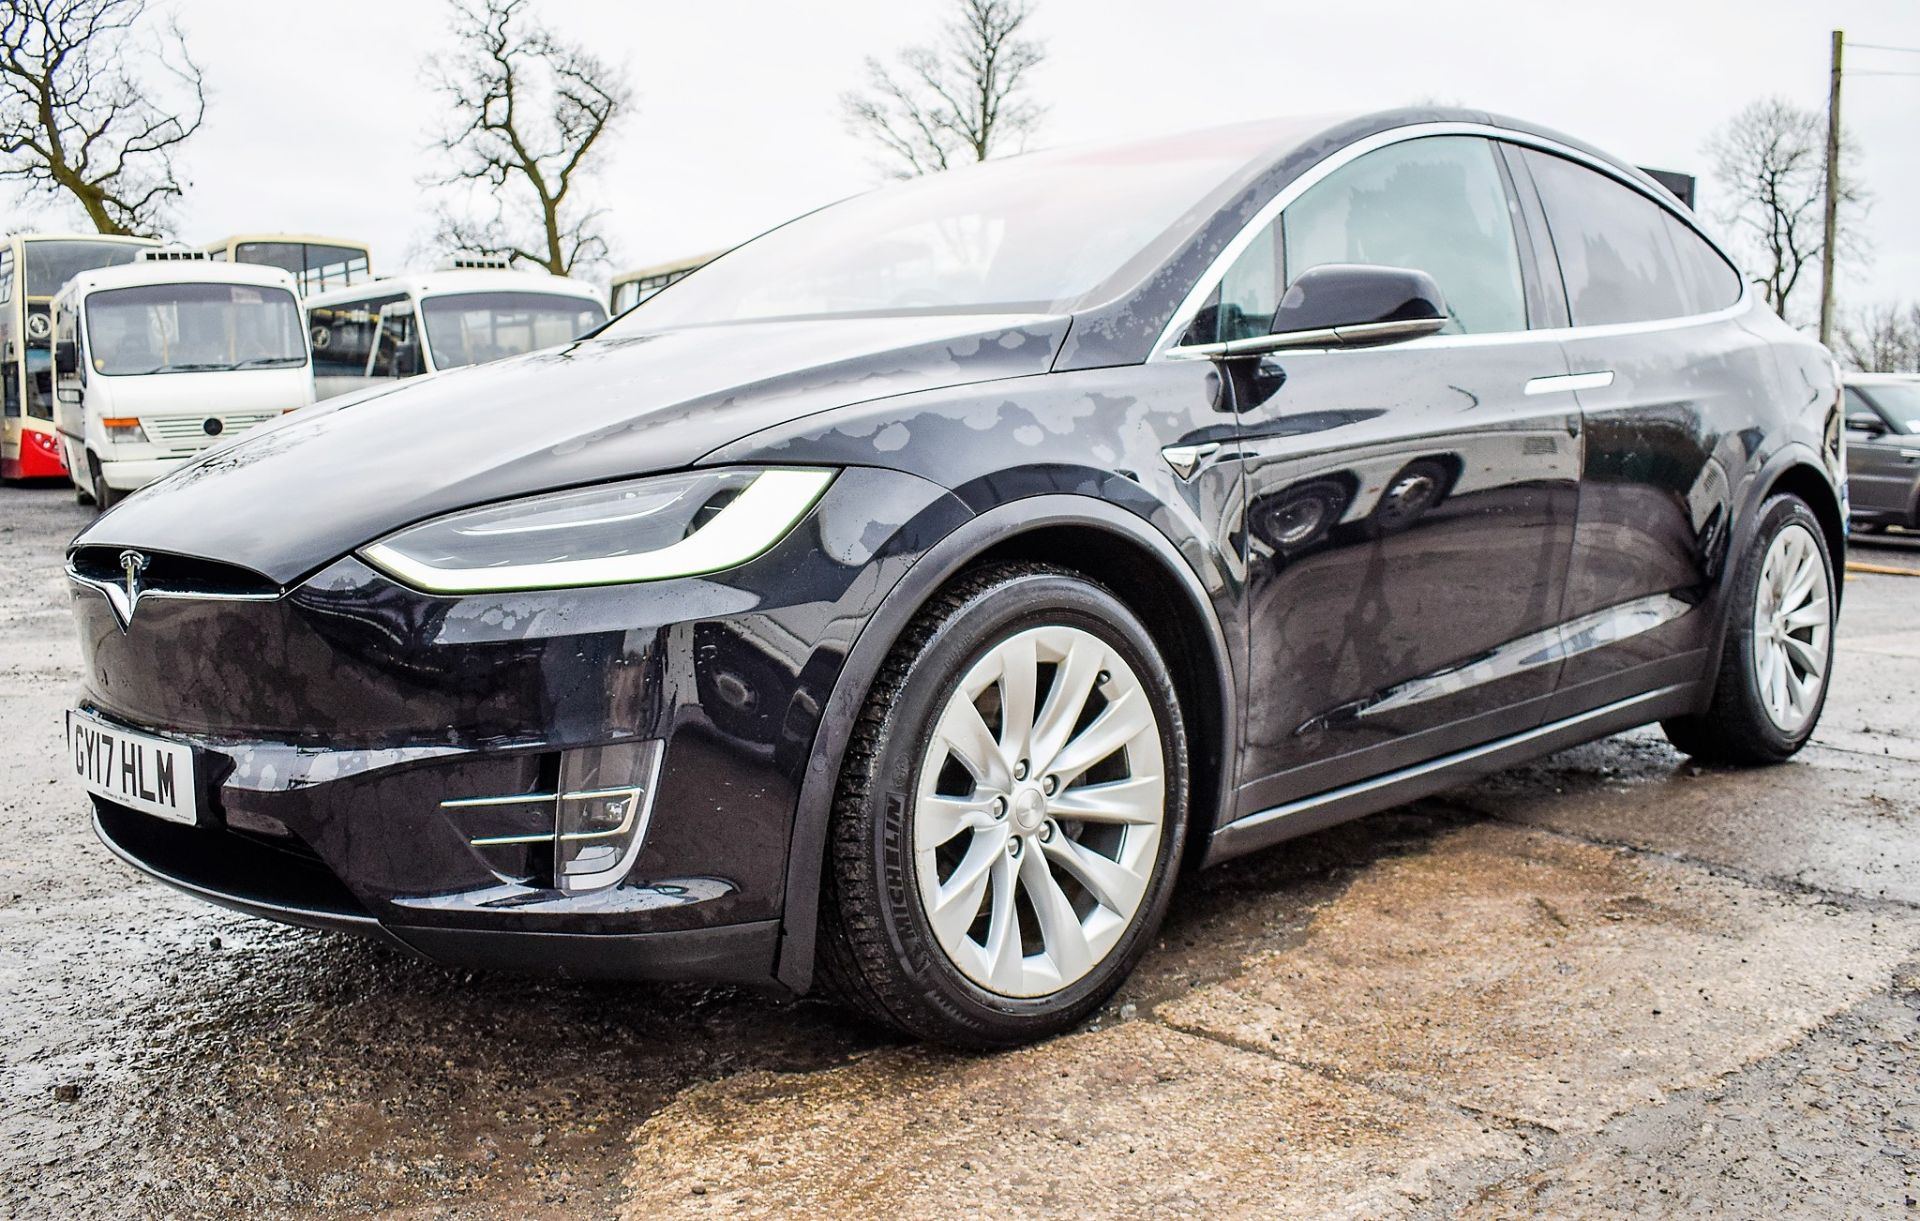 Tesla Model X 90 D dual motor 7 seat battery electric SUV Registration Number: GY17 HLM Date of